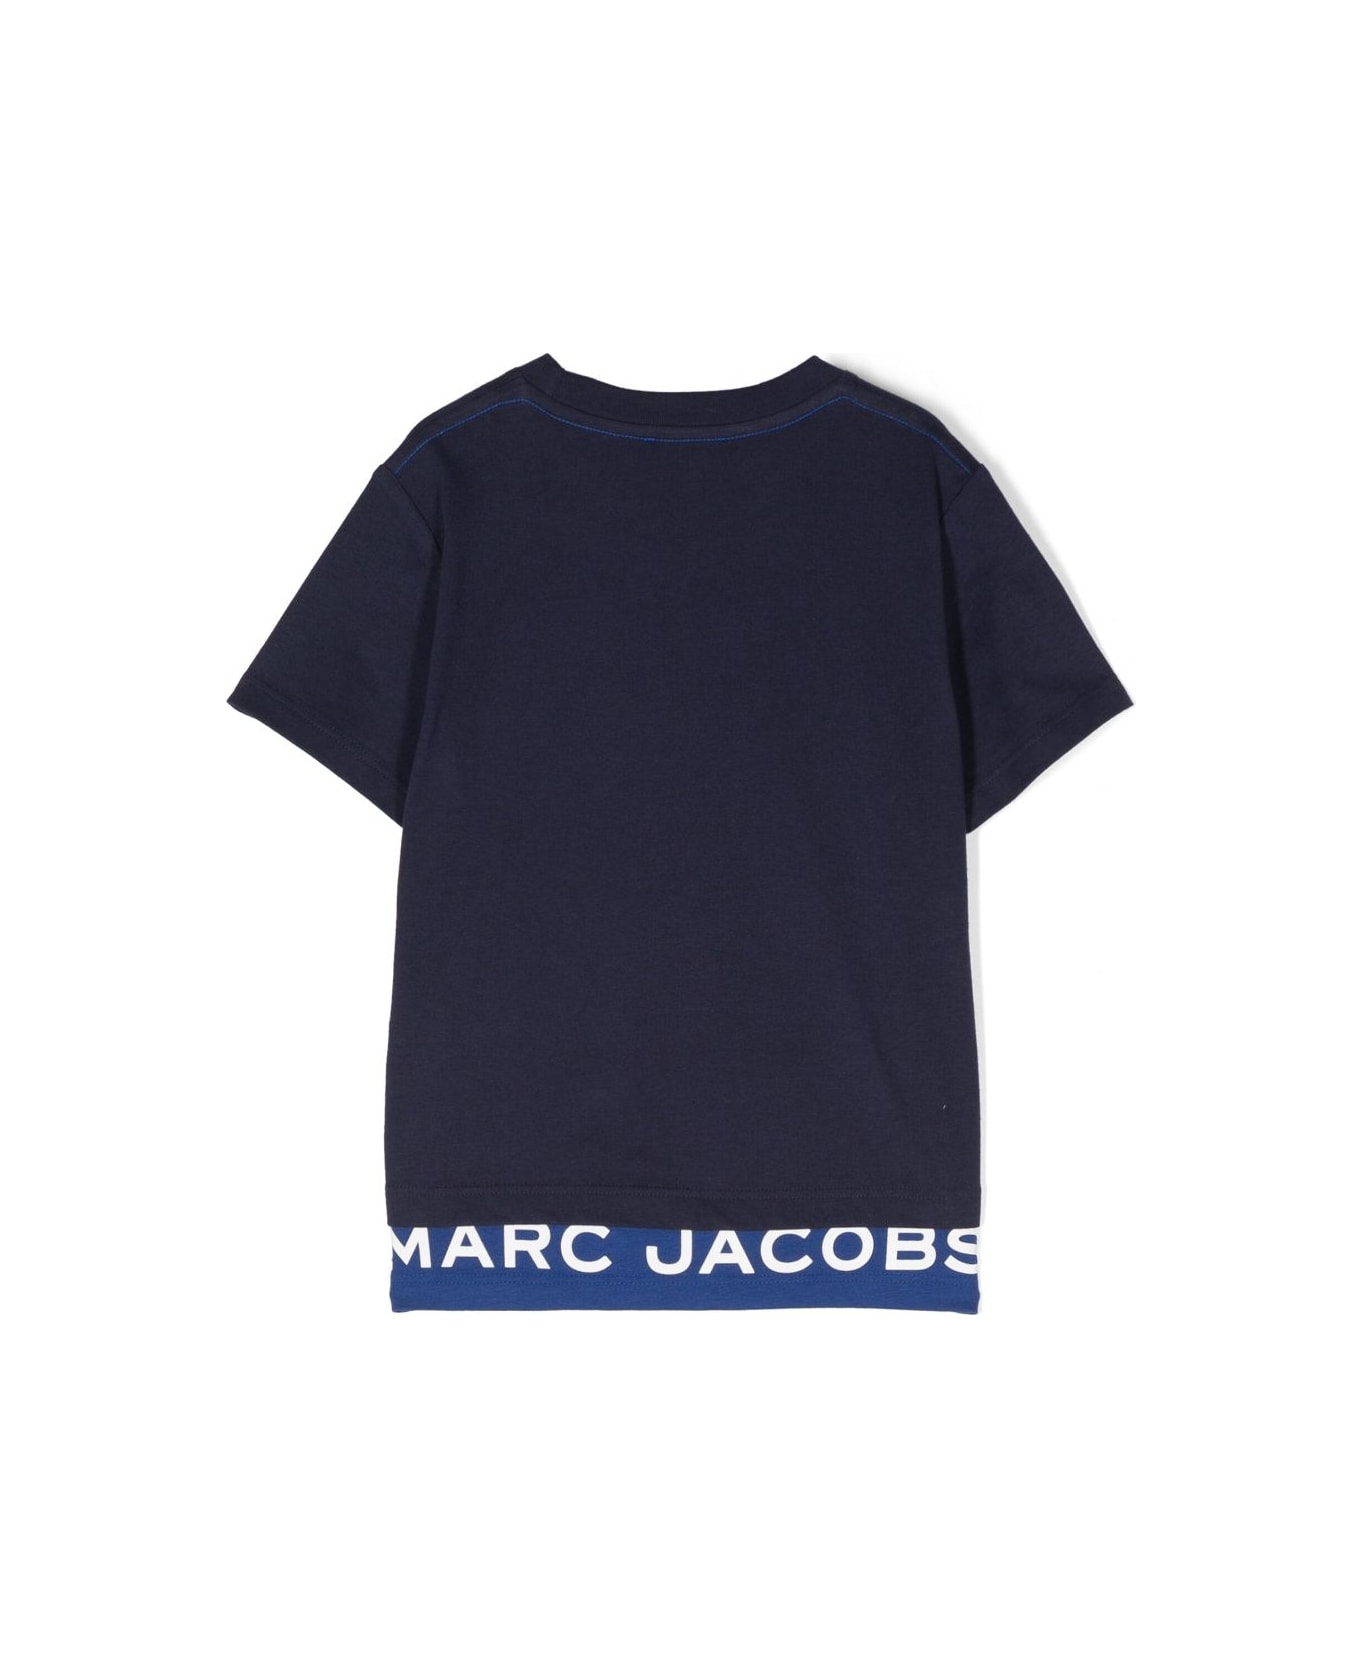 Little Marc Jacobs Marc Jacobs T-shirt Blu Con Pannelli A Contrasto In Jersey Di Cotone Bambino - Blu